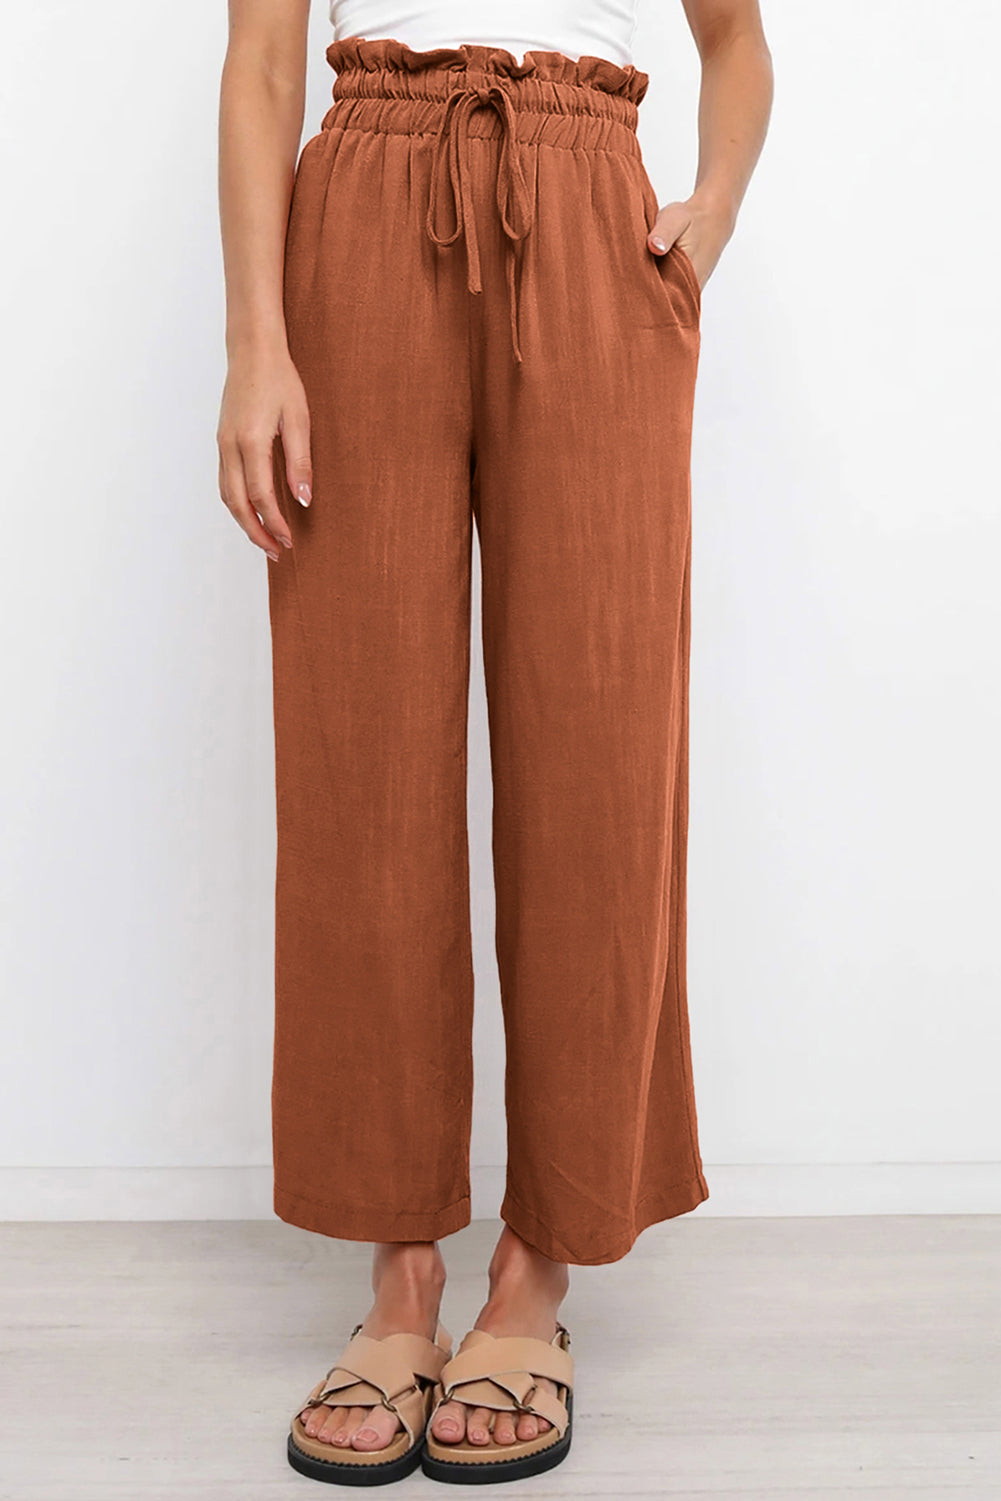 LC771296-17-S, LC771296-17-M, LC771296-17-L, LC771296-17-XL, Brown Women's High Waist Paper Bag Straight Leg Cropped Long Pants with Pocket